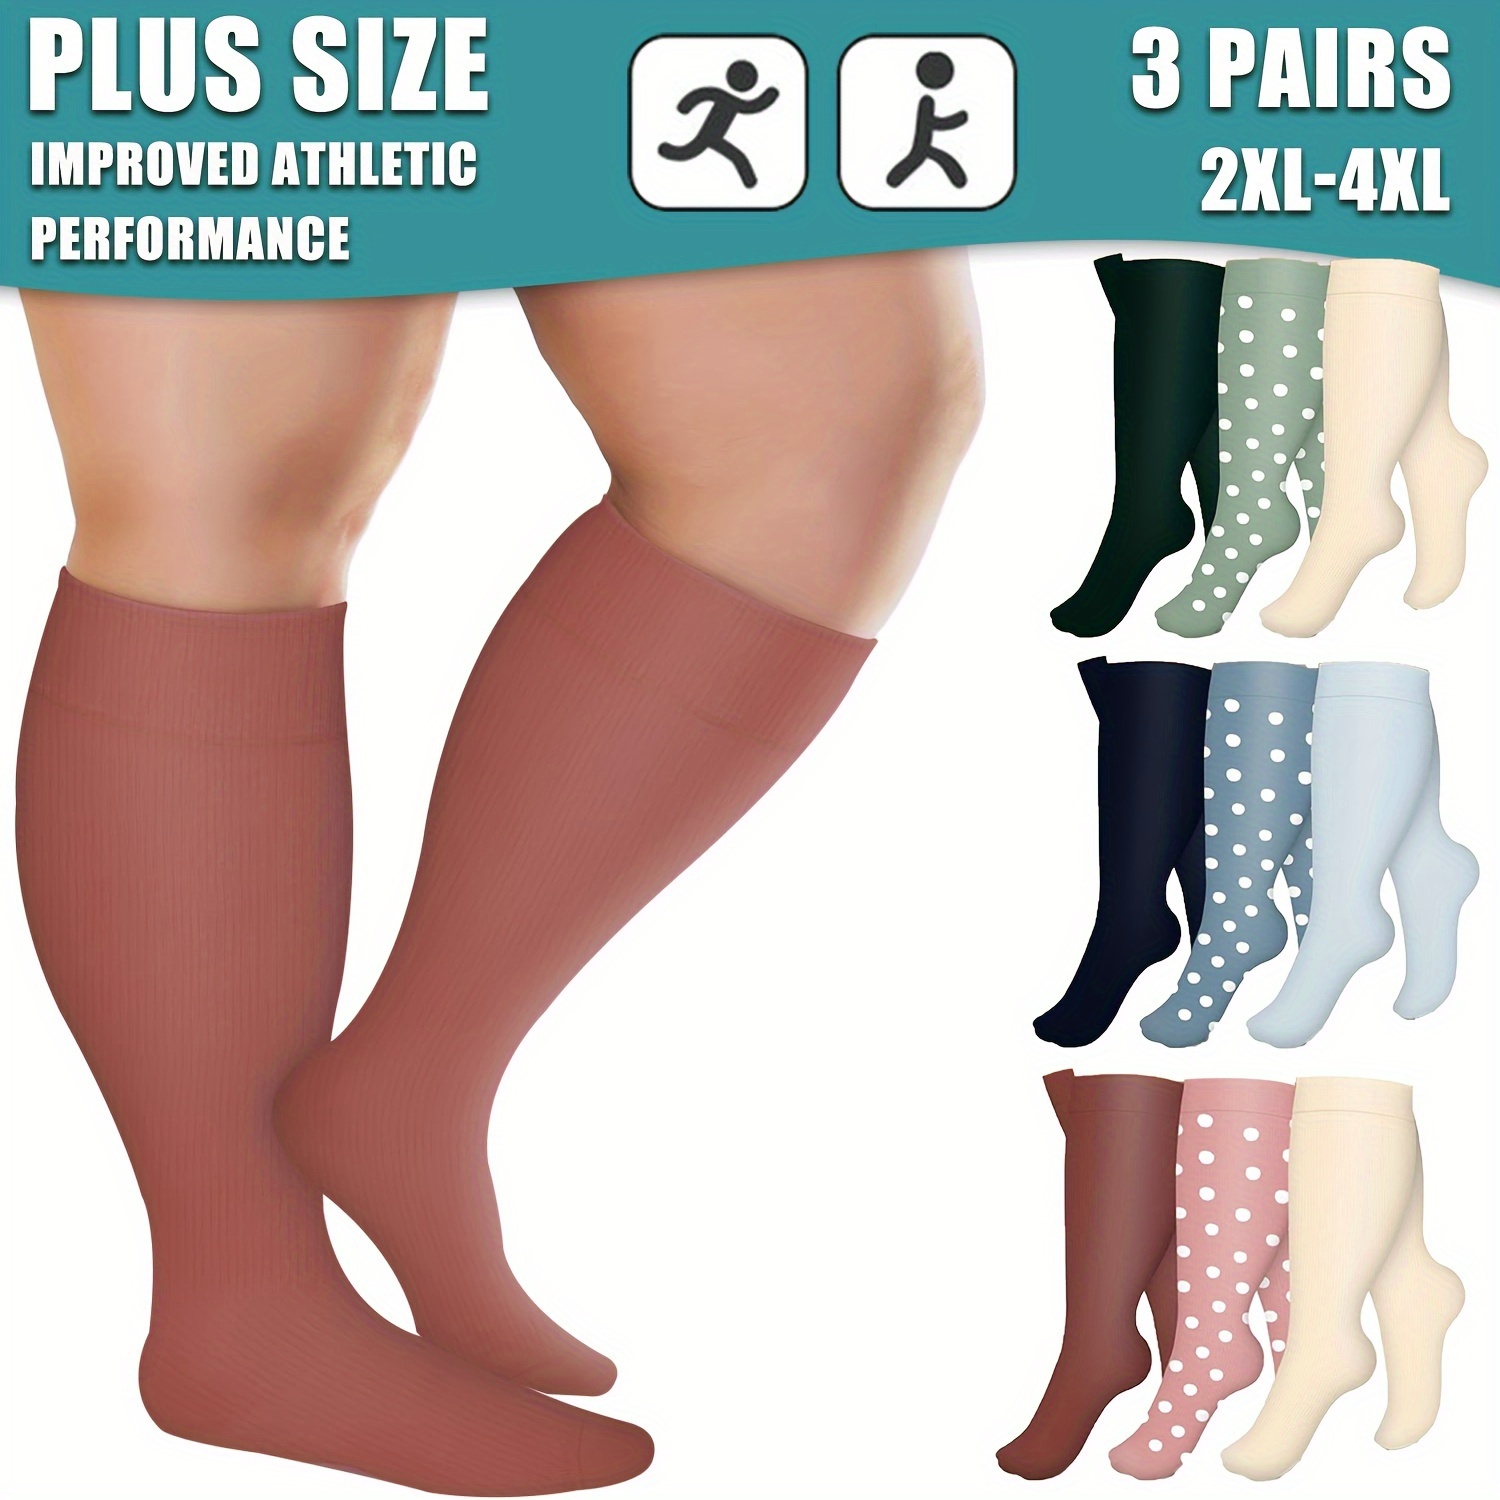 3 Pairs Plus Size Compression Socks Wide Calf For Women & Men 20